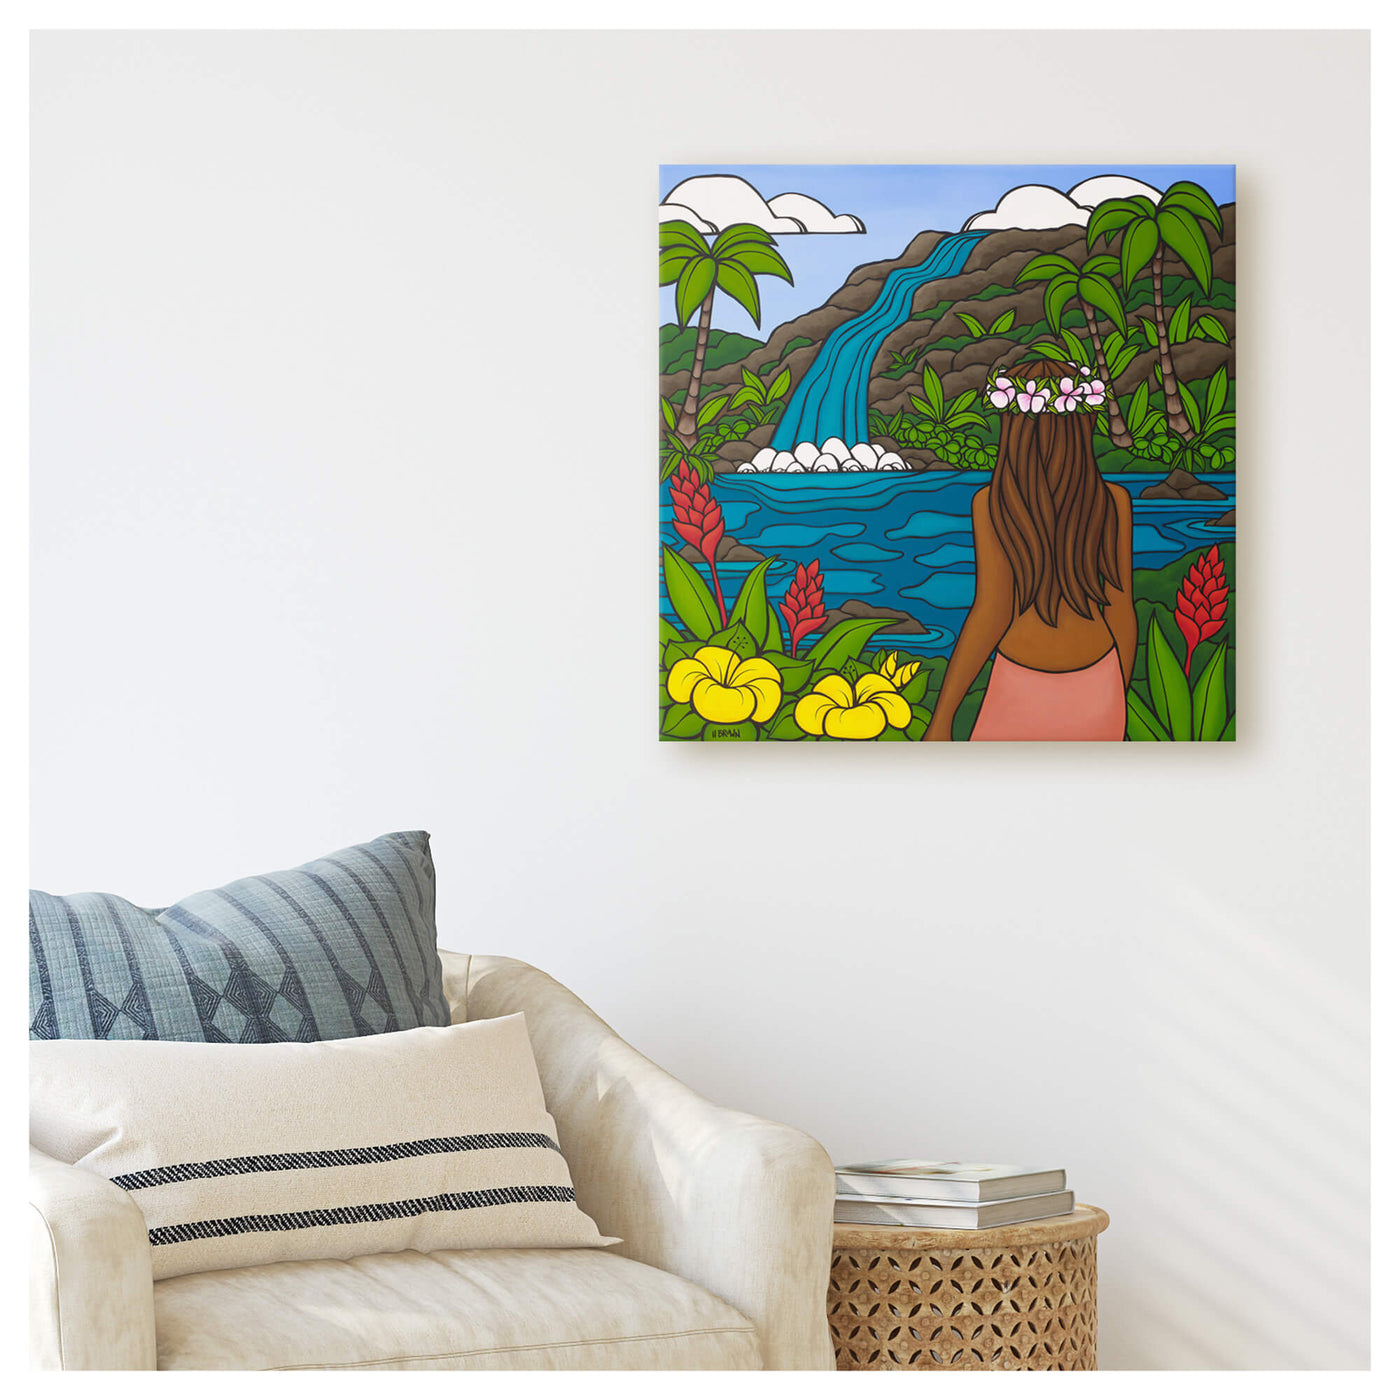 A canvas giclée art print of a local woman enjoying the waterfall view with colorful tropical flowers surrounding her by Hawaii surf artist Heather Brown